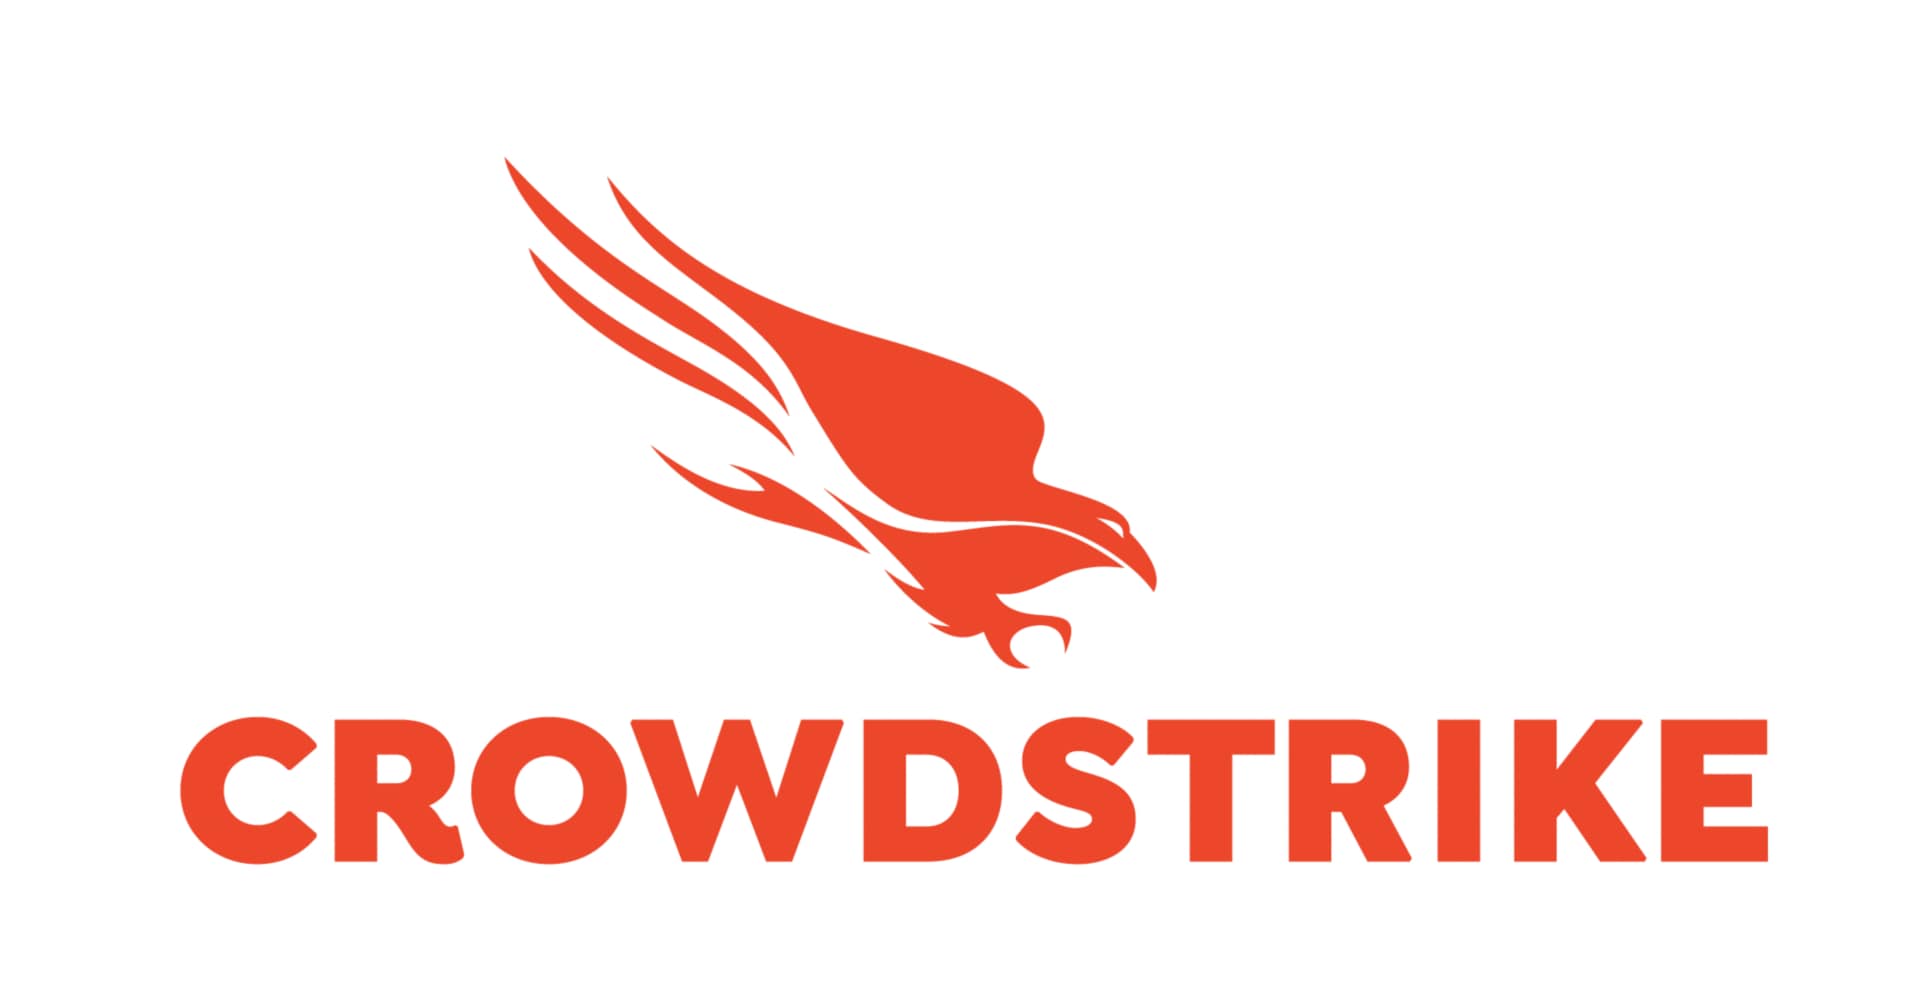 CrowdStrike Intelligence Actor Profiles and Indicators of Compromise (IOC) Feed